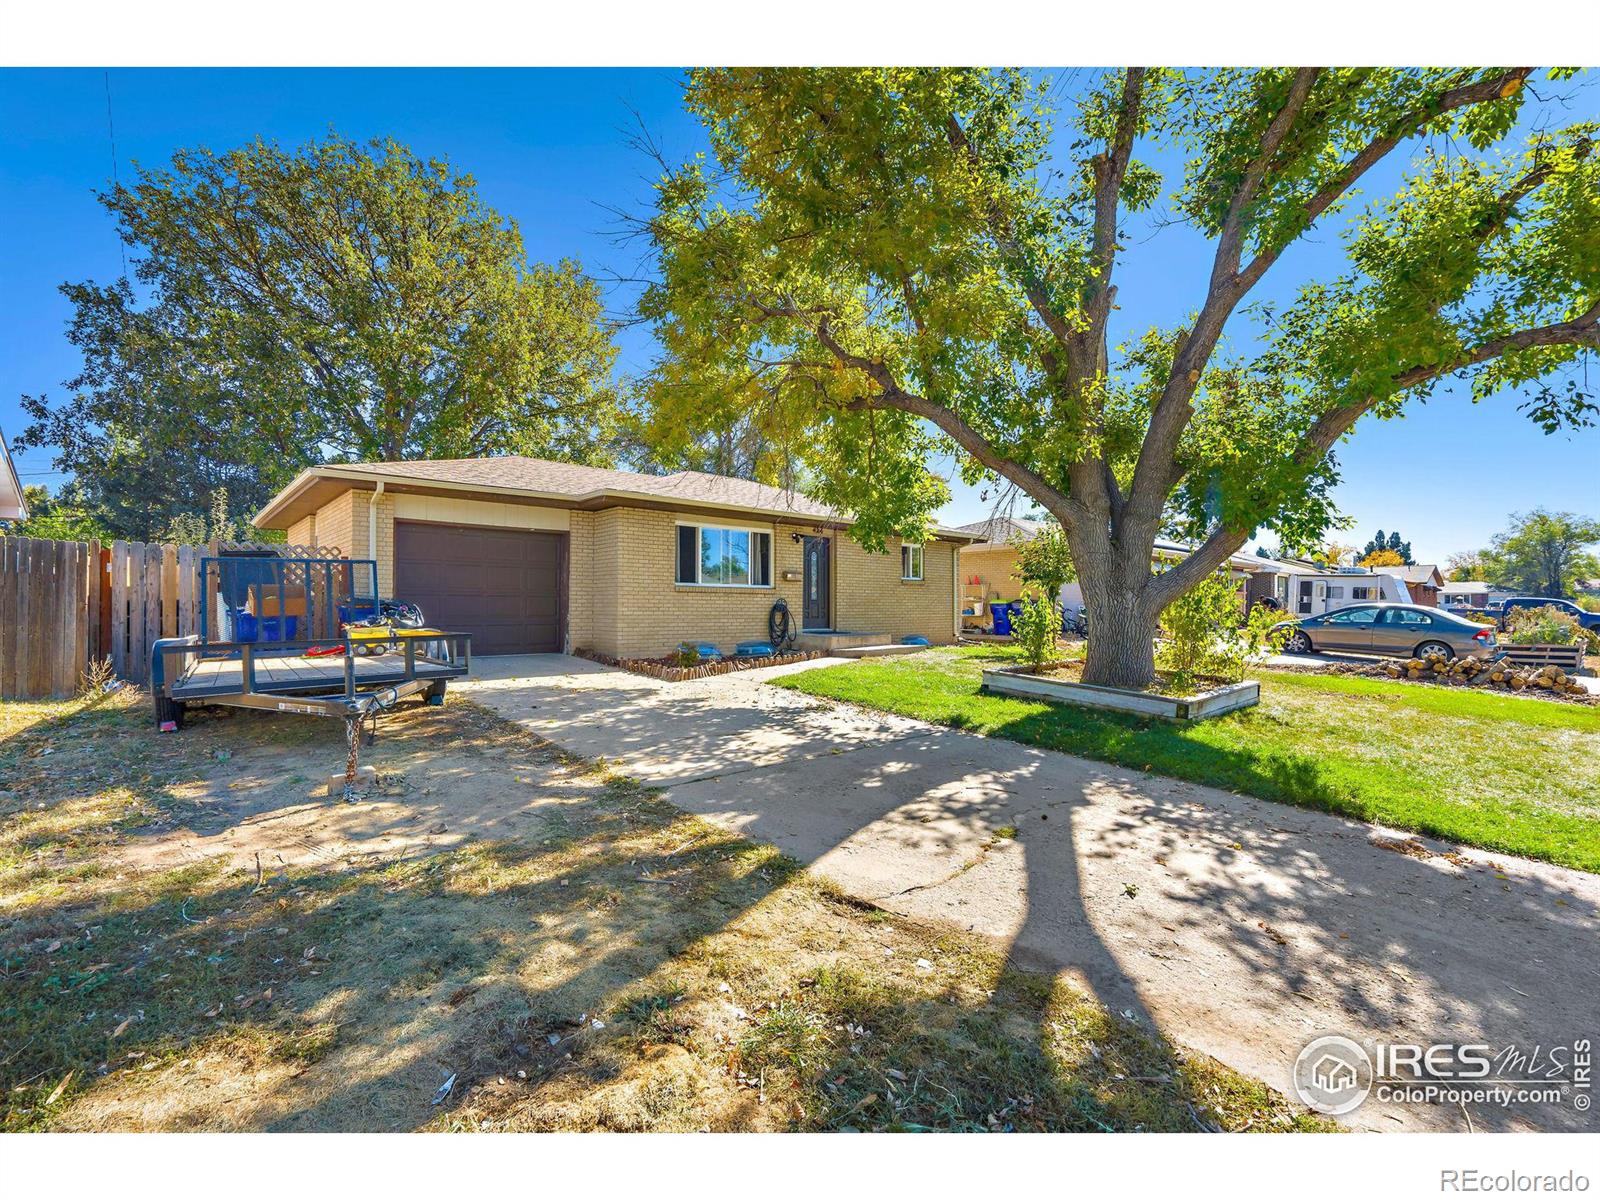 424  29th Avenue, greeley MLS: 456789998324 Beds: 4 Baths: 2 Price: $340,000